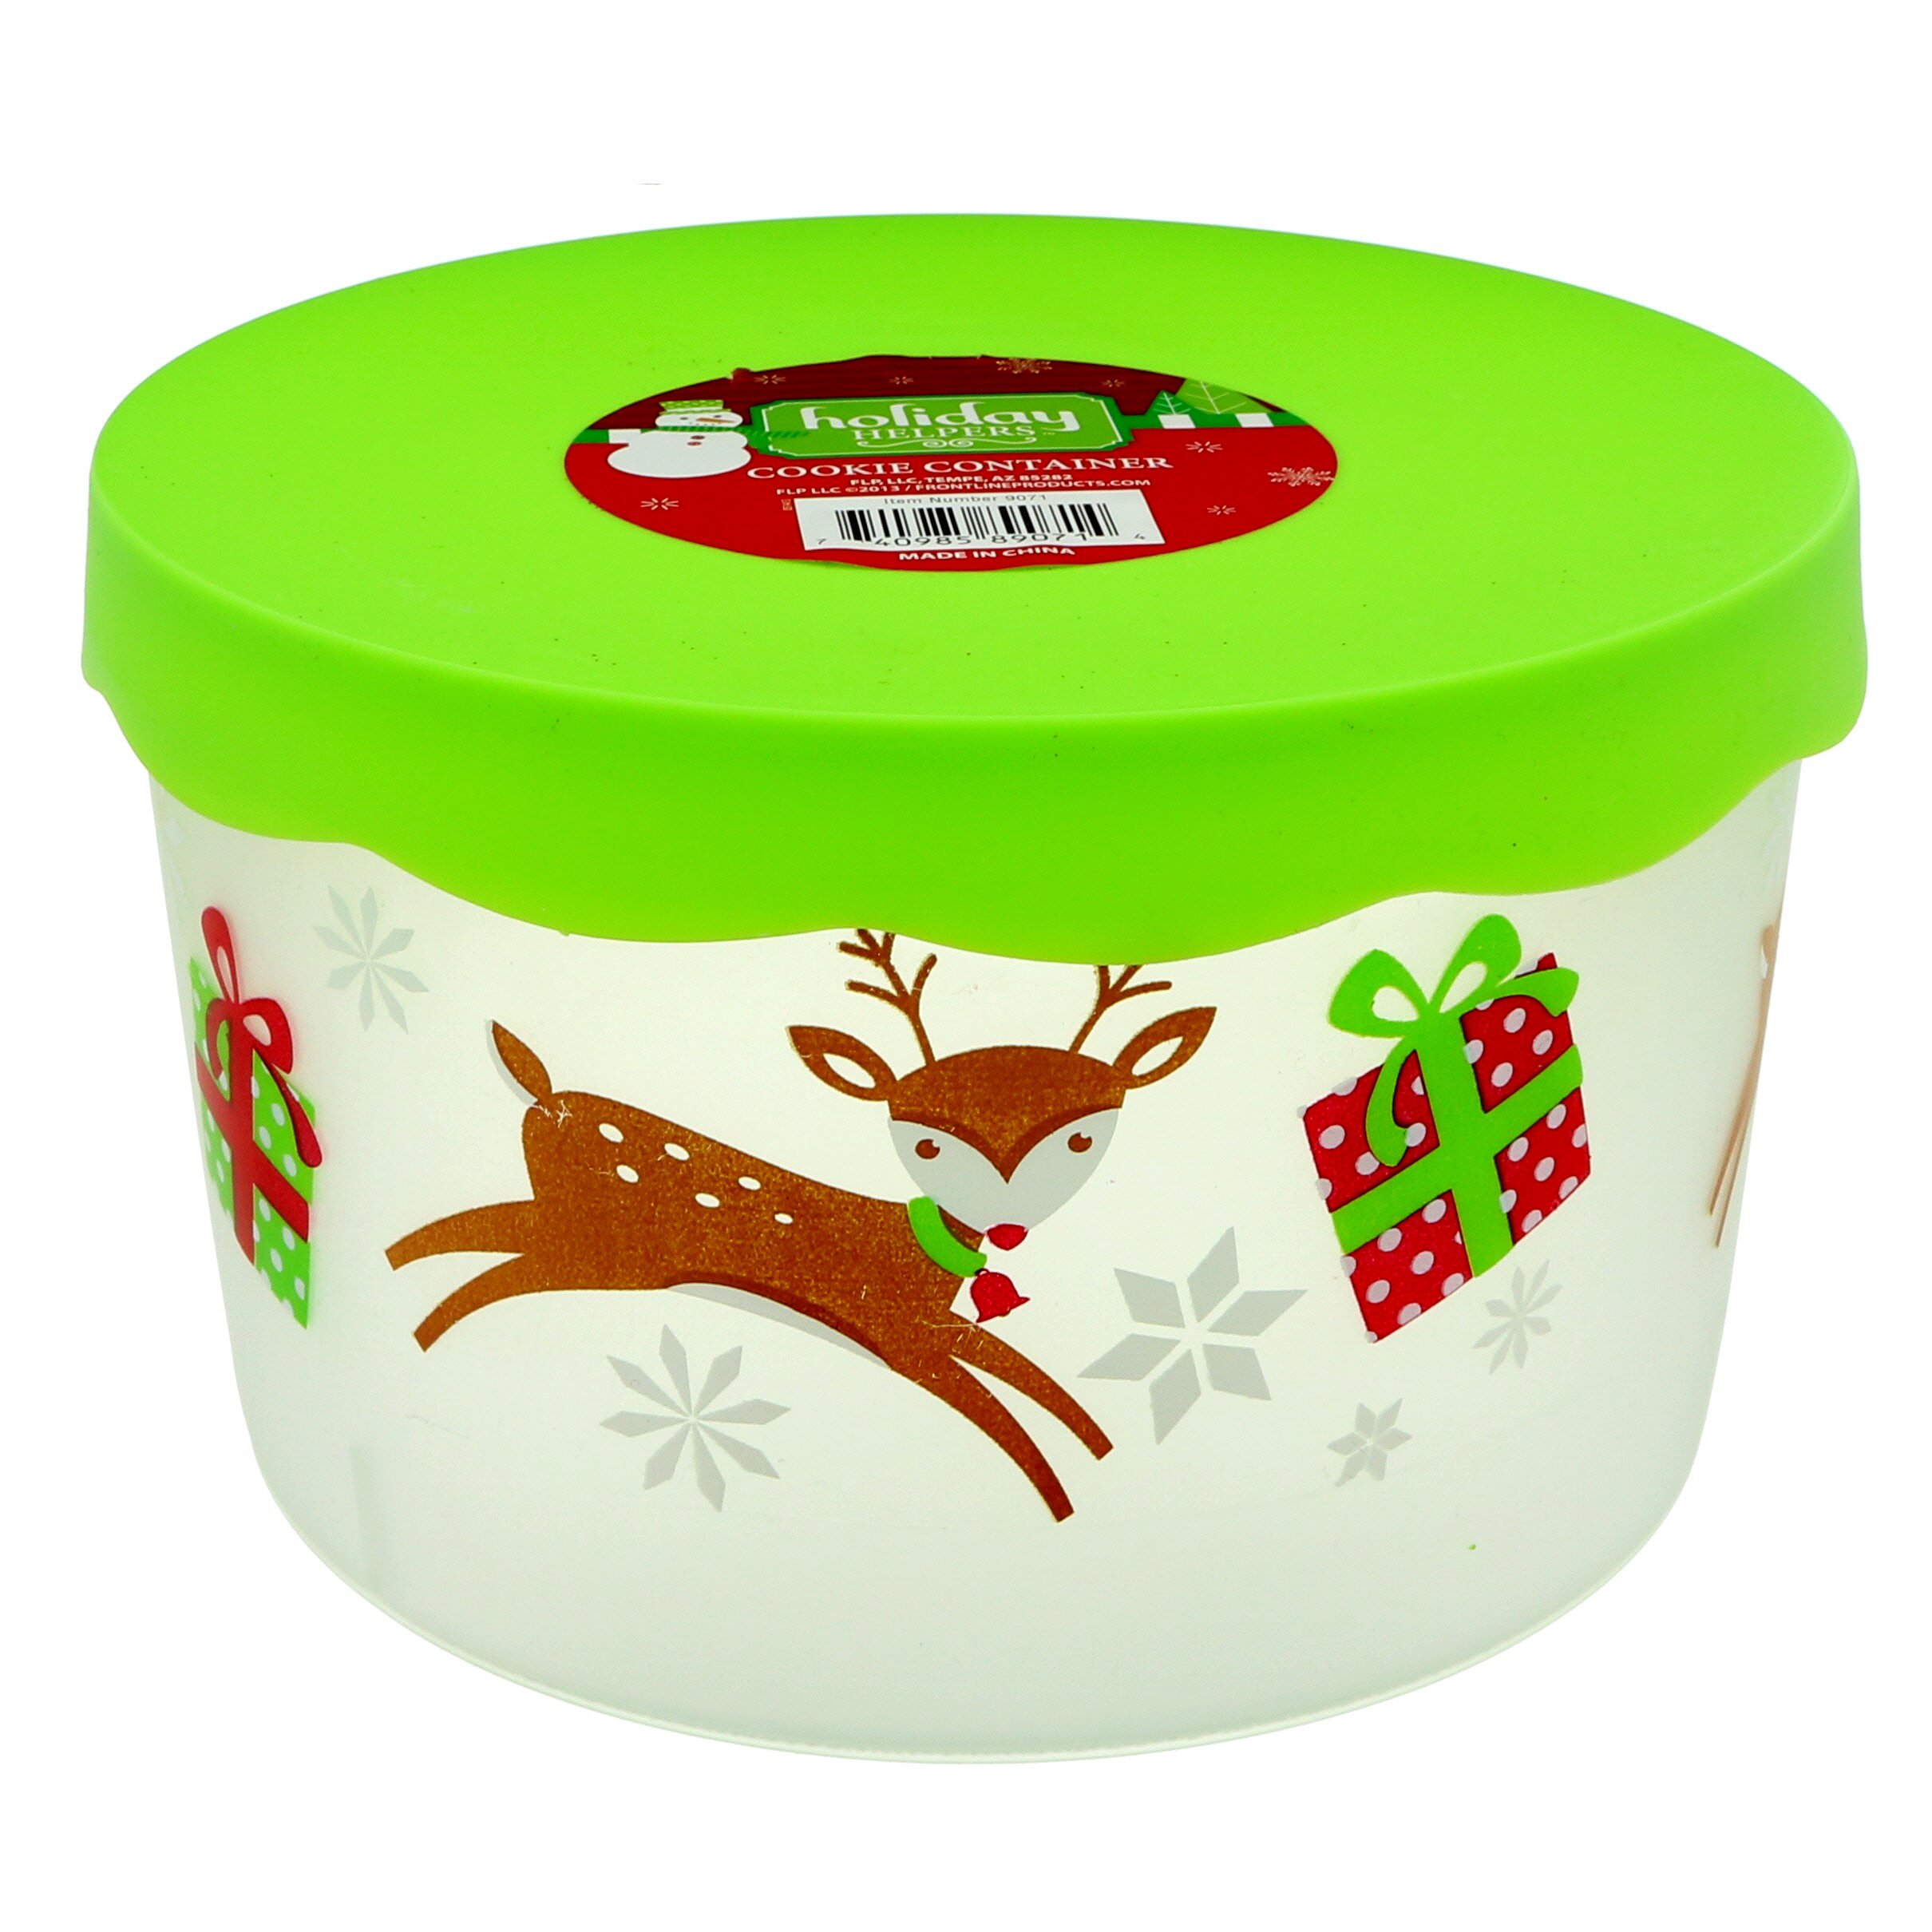 American Maid, Kitchen, Christmas Cookie 3 Pk Plastic Storage Containers  W Lids Set Of 4 Nwt